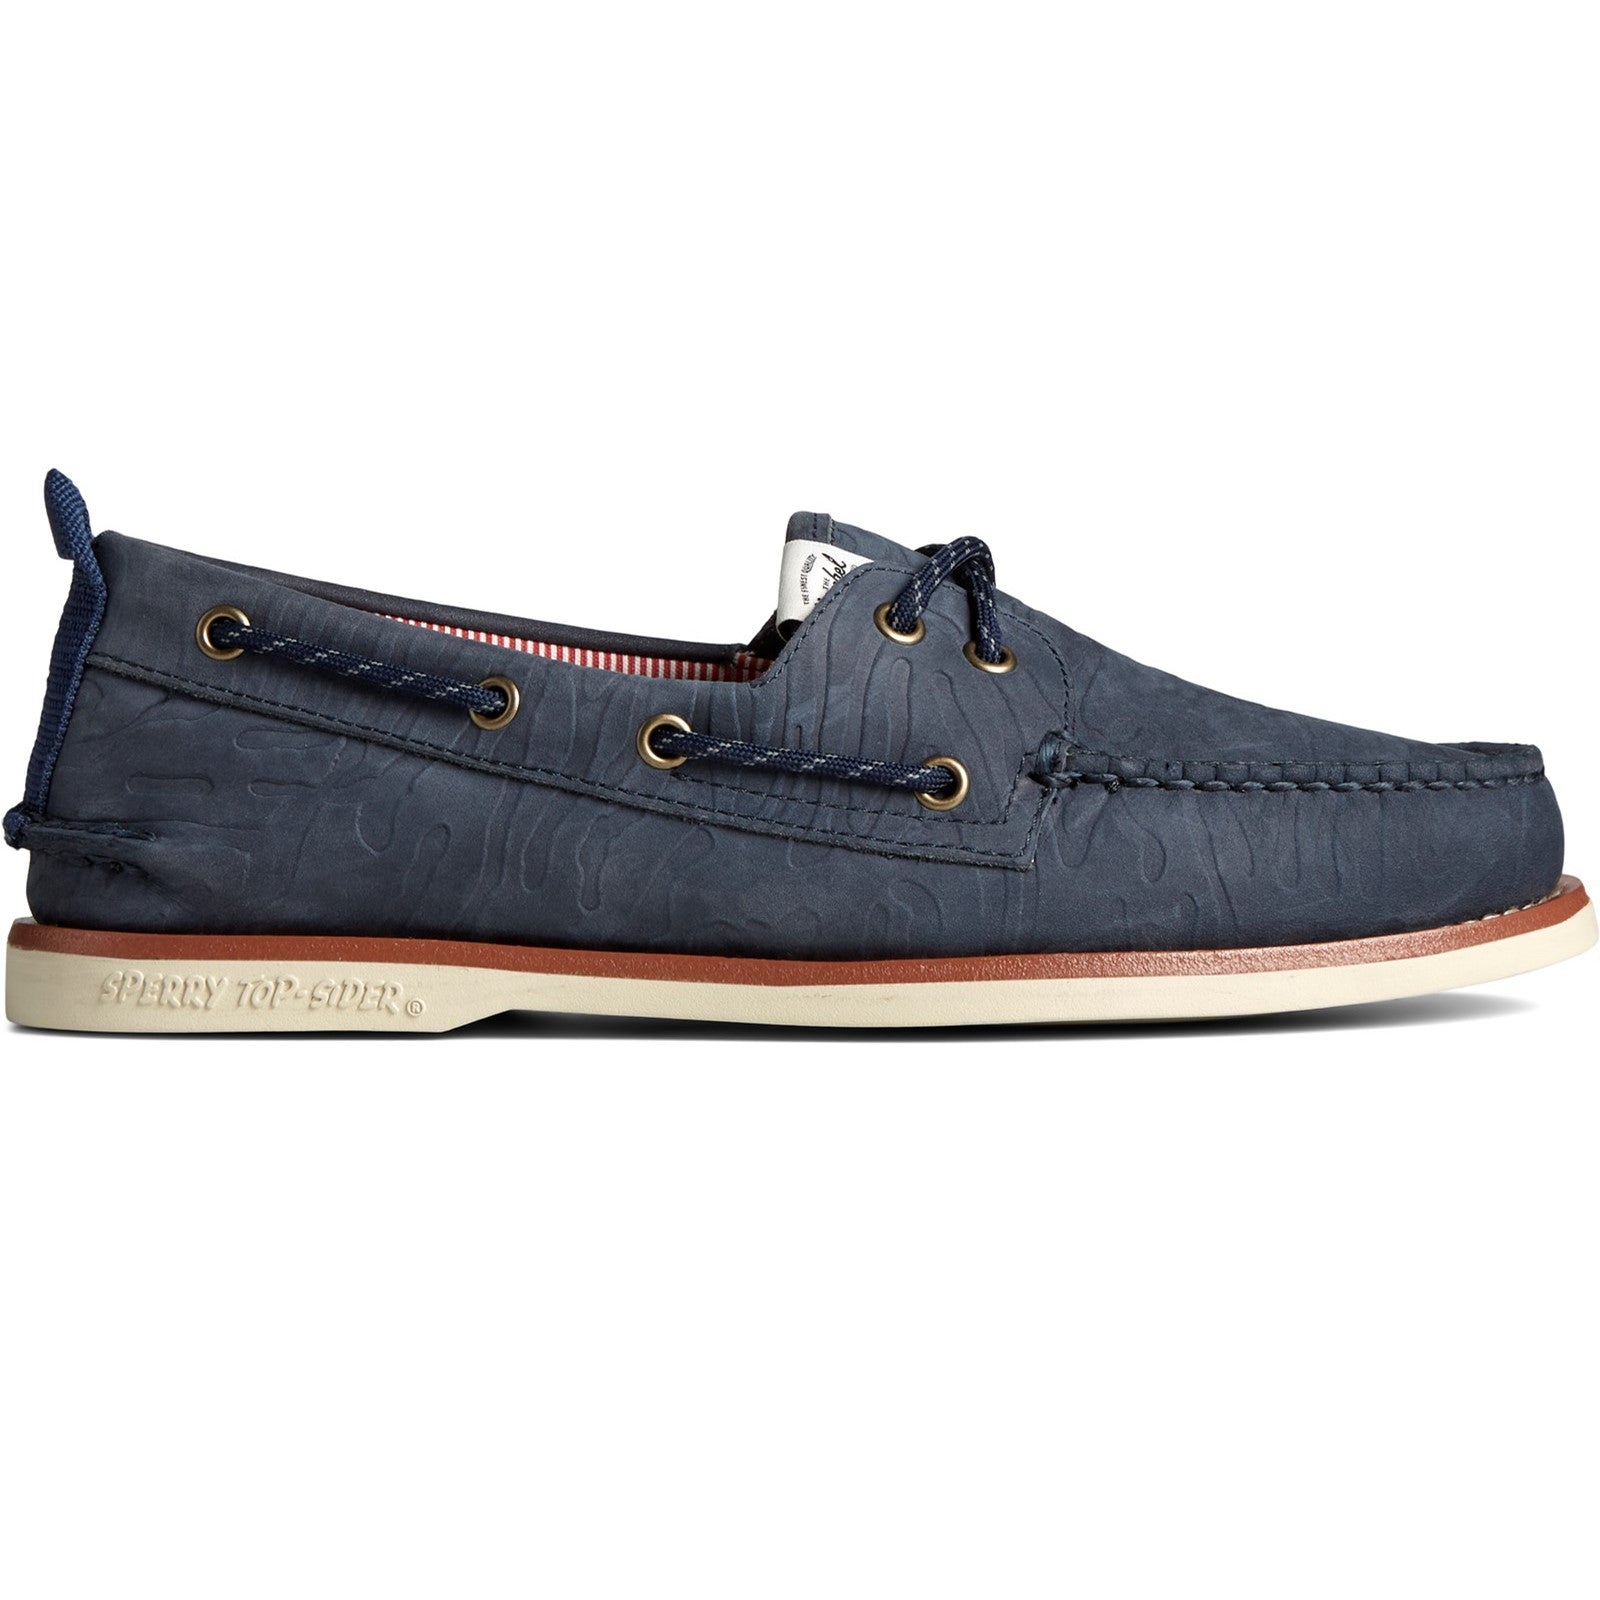 Sperry Mens Authentic Original 2-Eye Boat Shoes - Navy